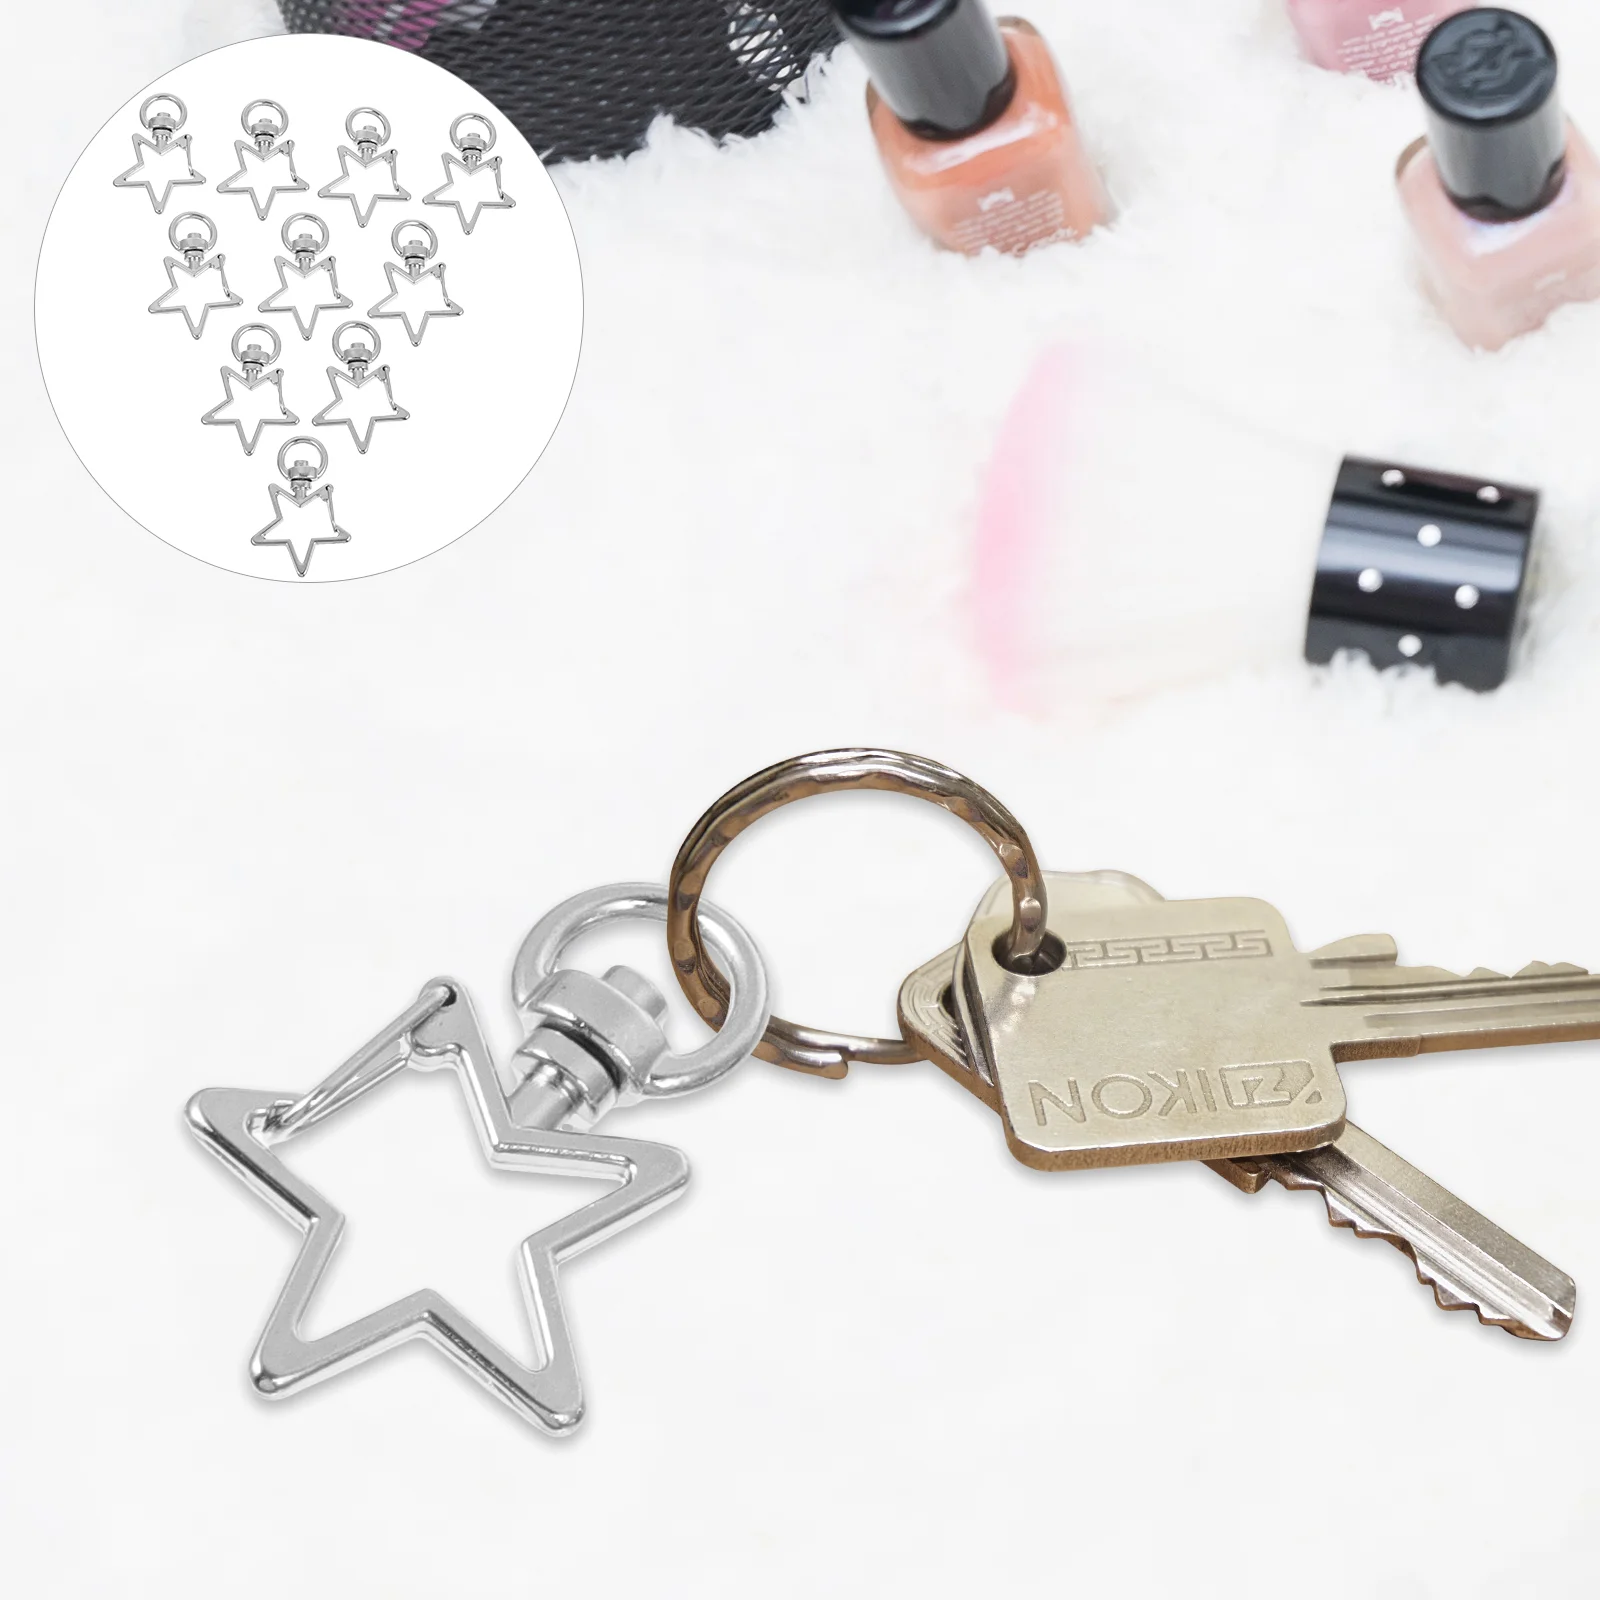 

40 Pcs Star Keychain Shape Snap Hook Metal Keychains Gold Ring Lobster Clasp Lanyards Keys Bag Jewelry Making Clasps